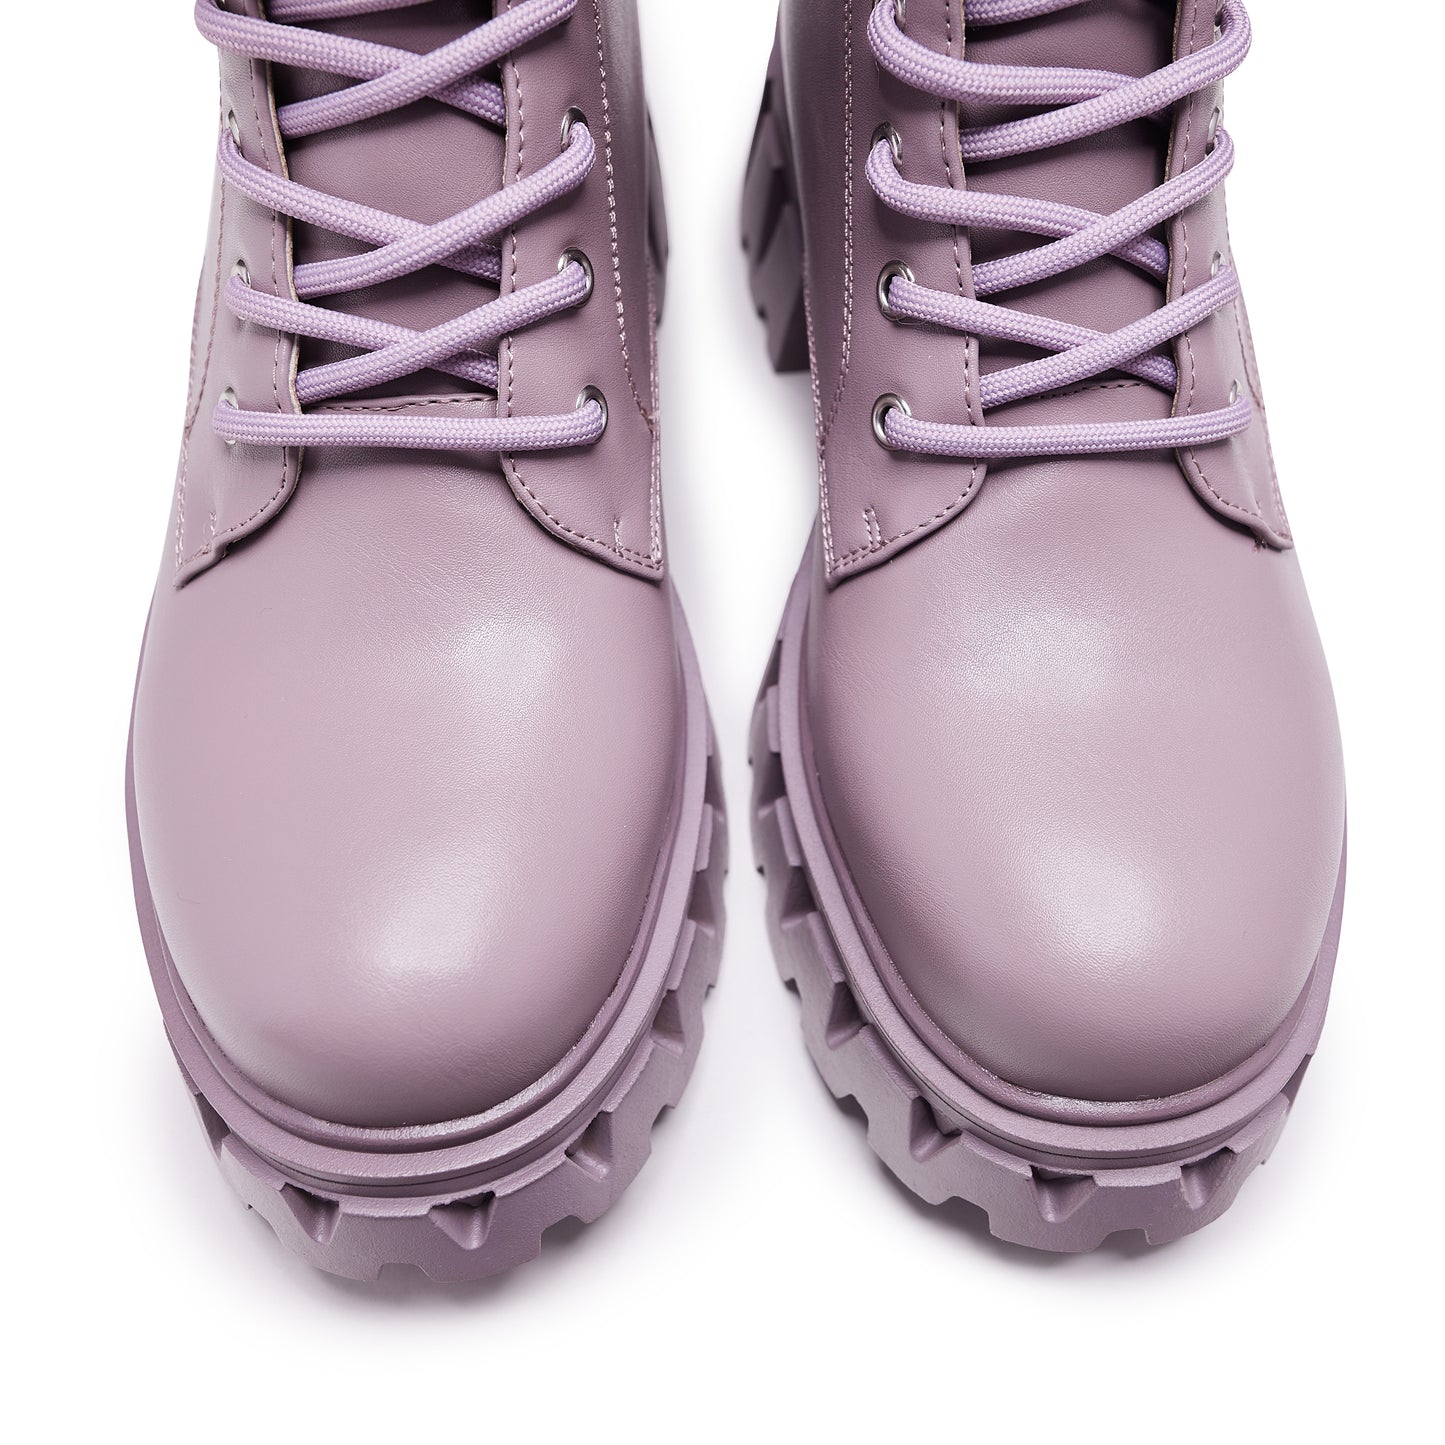 Siren Men's Tall Lace Up Boots - Berry - Ankle Boots - KOI Footwear - Purple - Top View